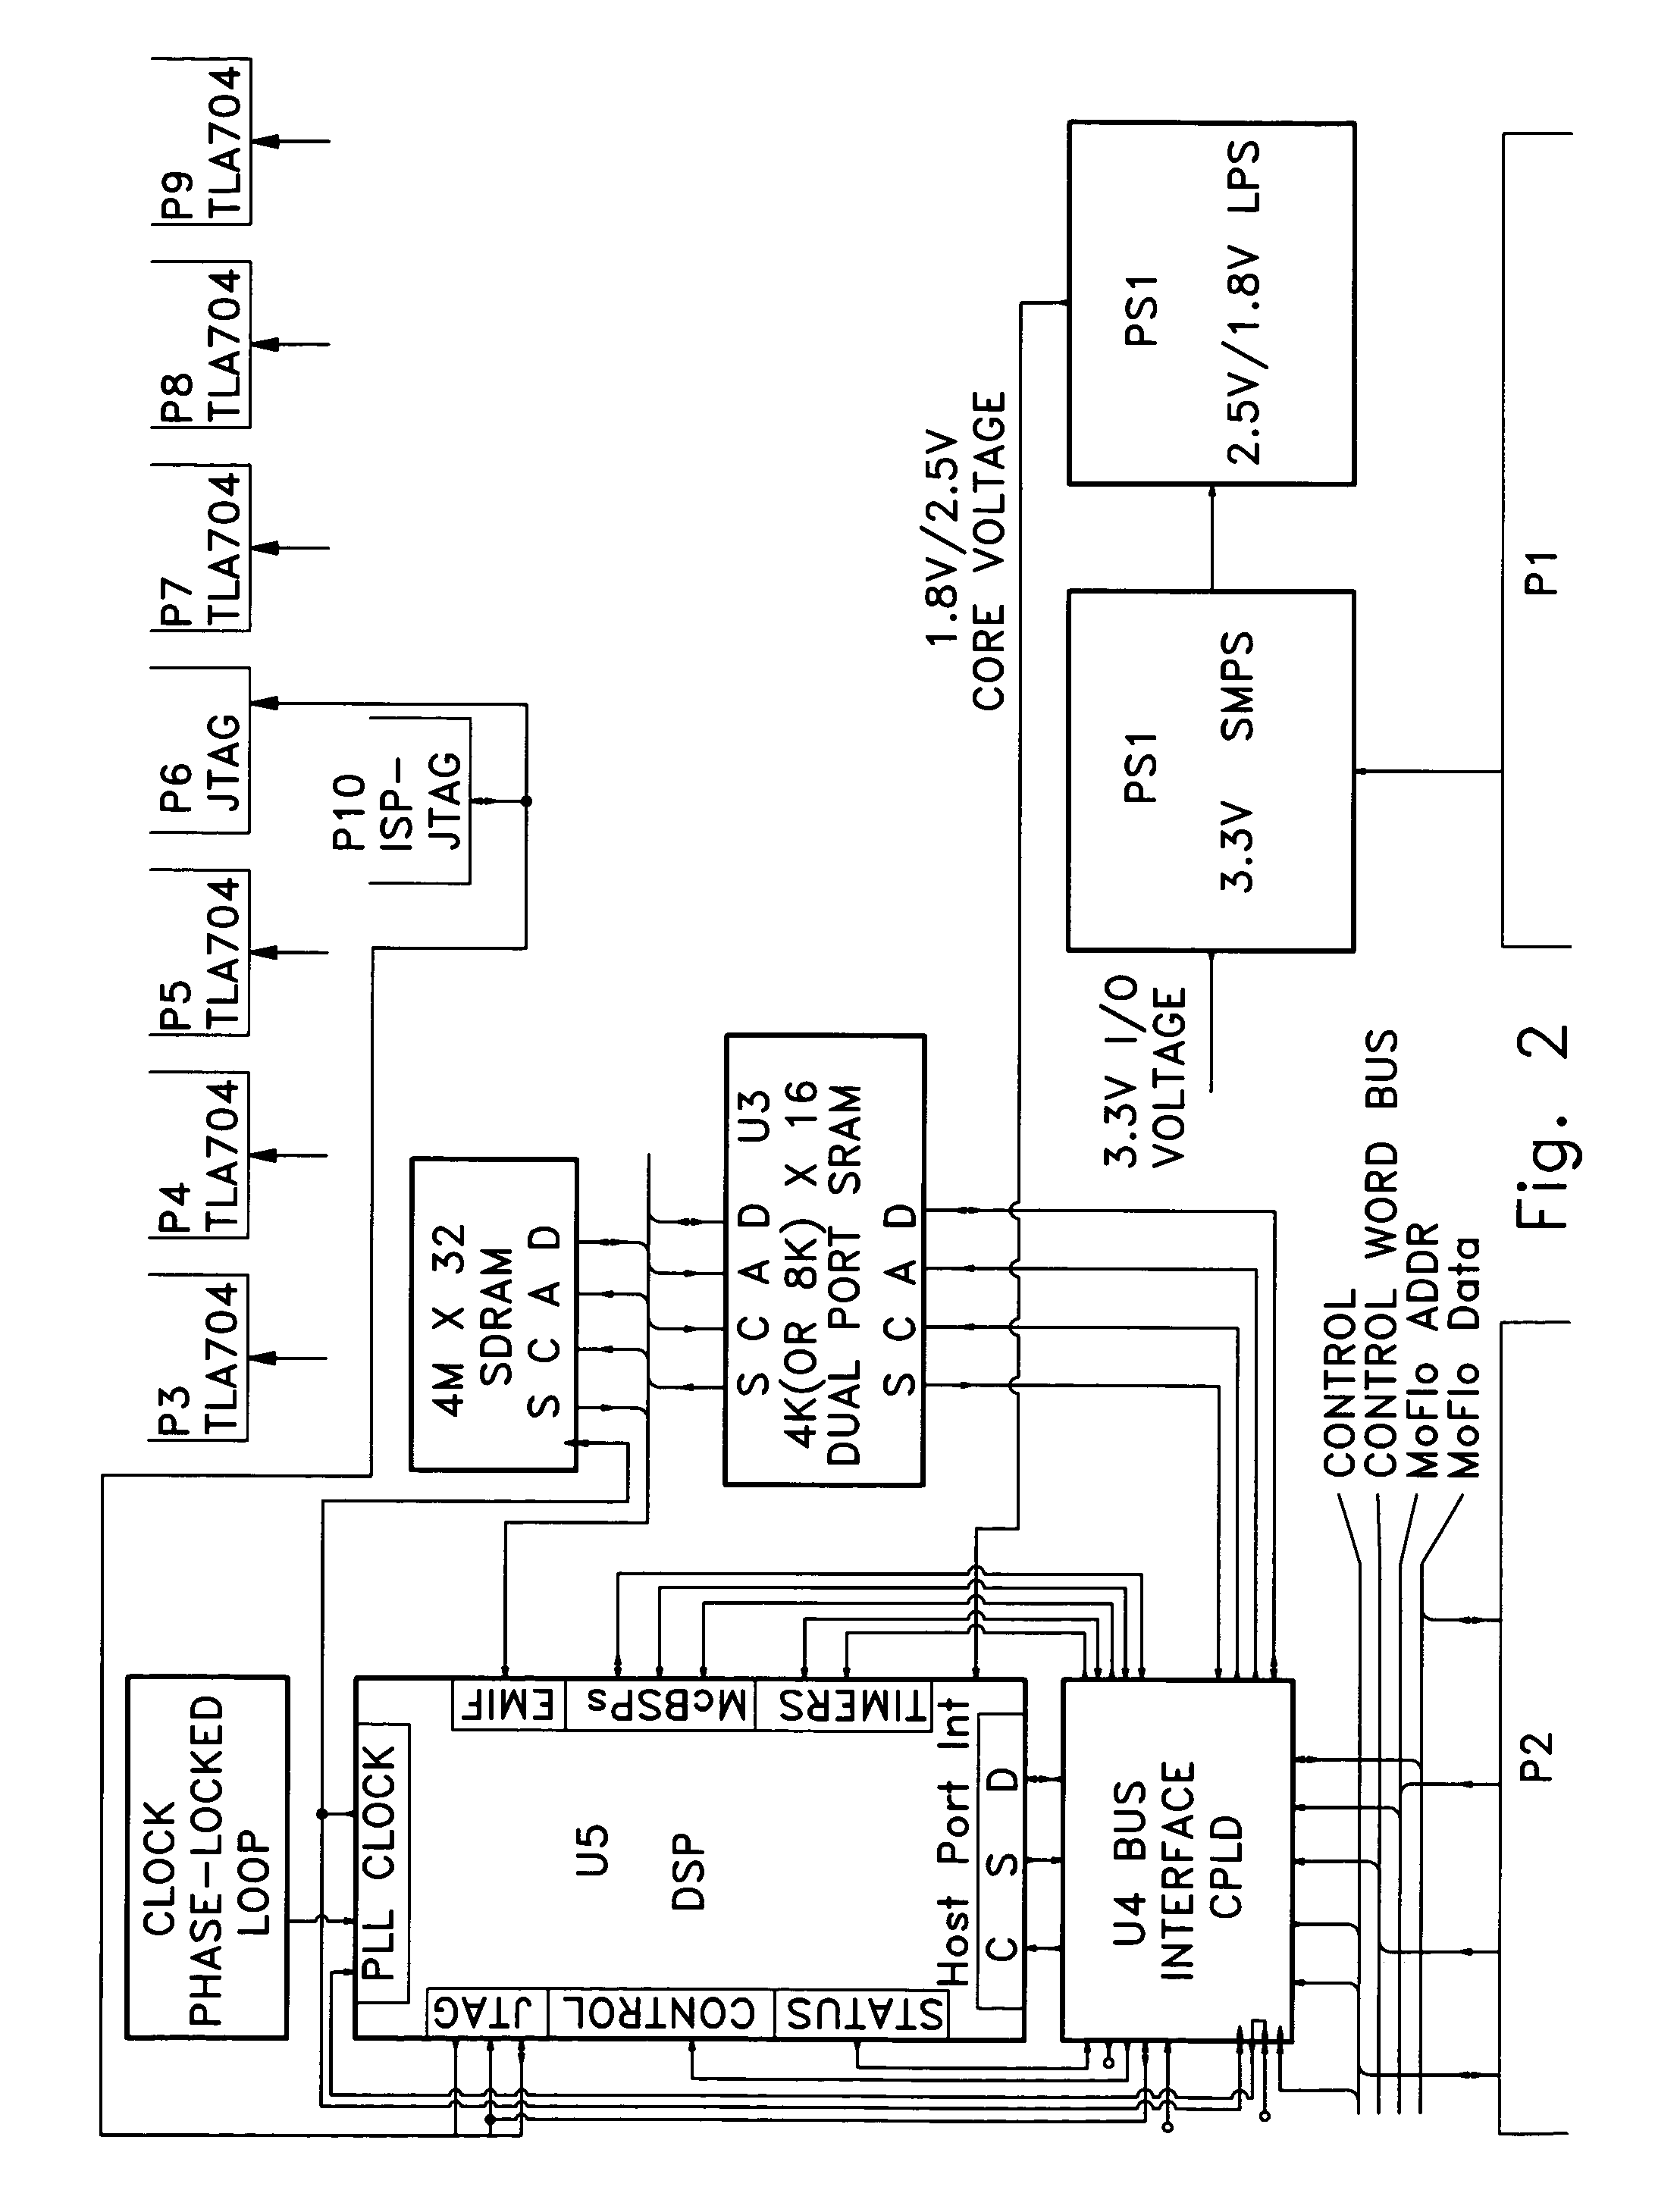 Transiently dynamic flow cytometer analysis system